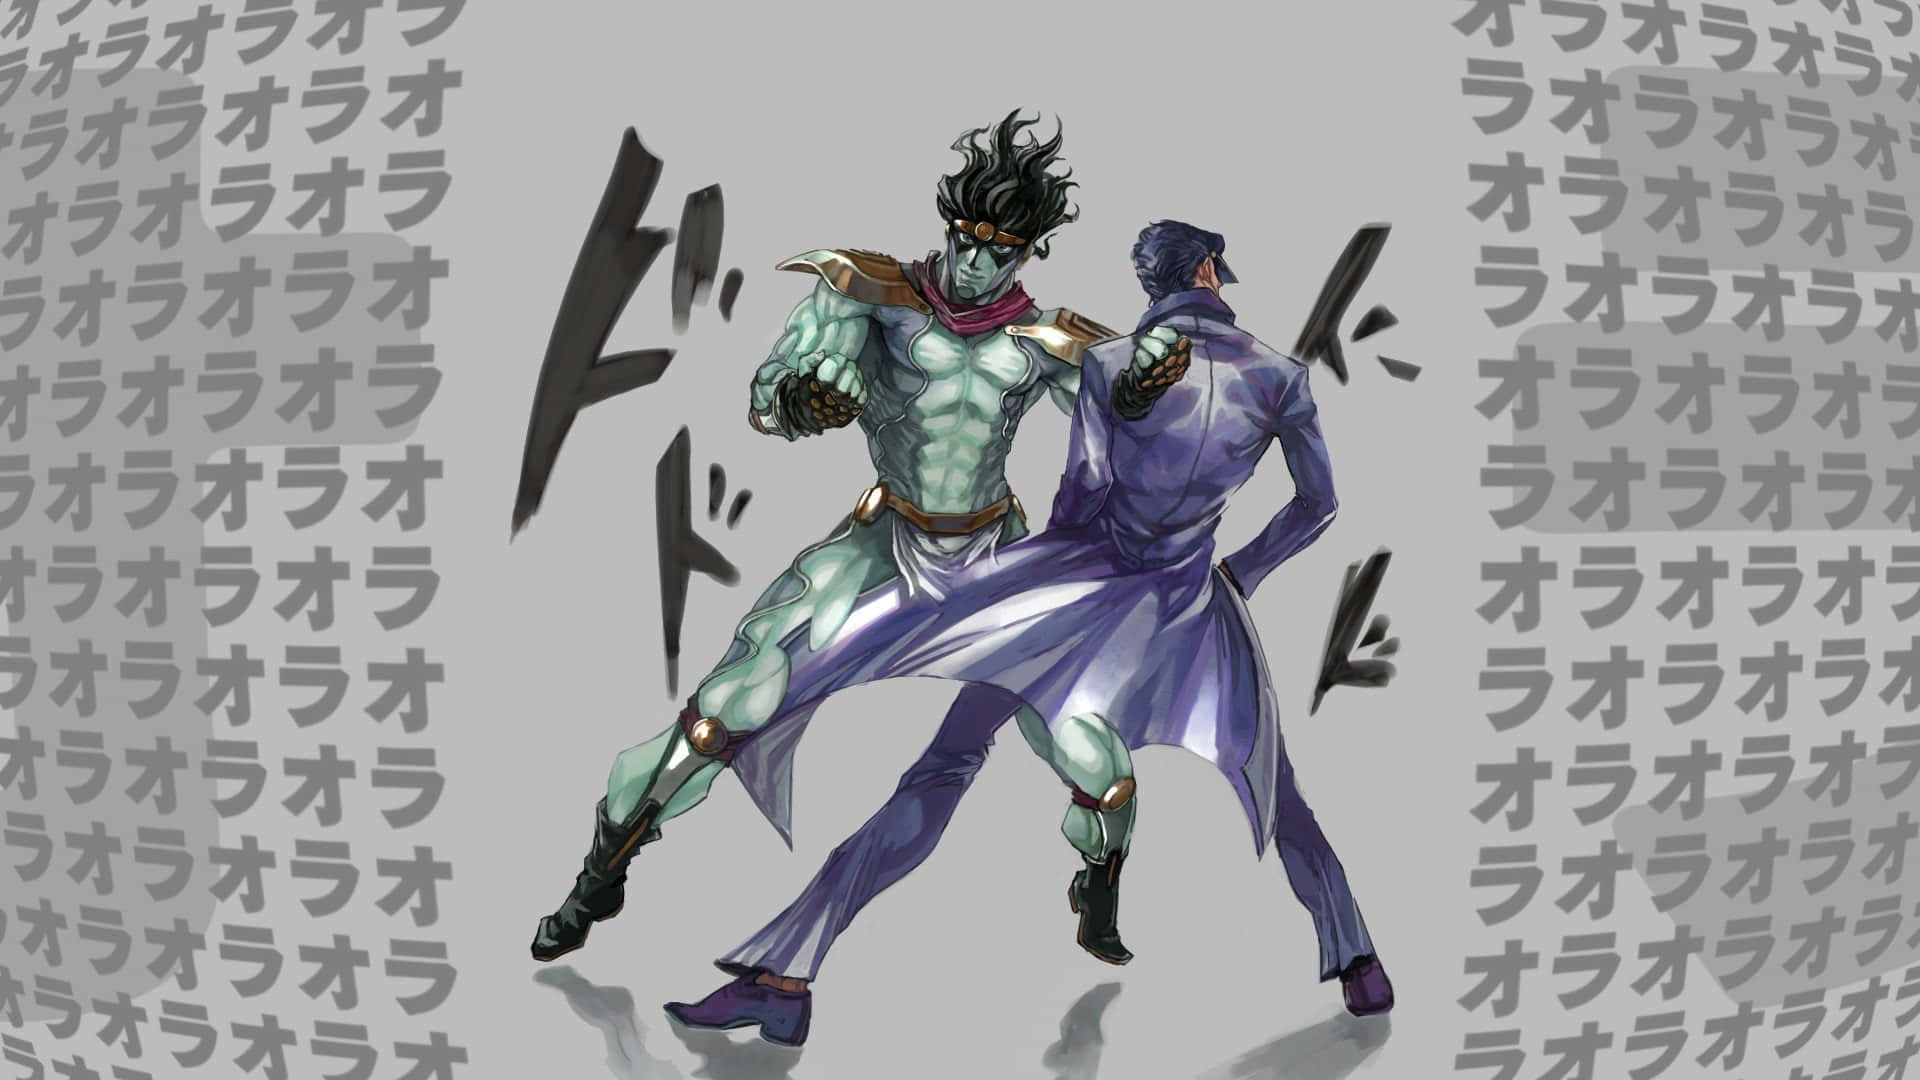 Jotaro Kujo striking a pose in his iconic hat and jacket Wallpaper